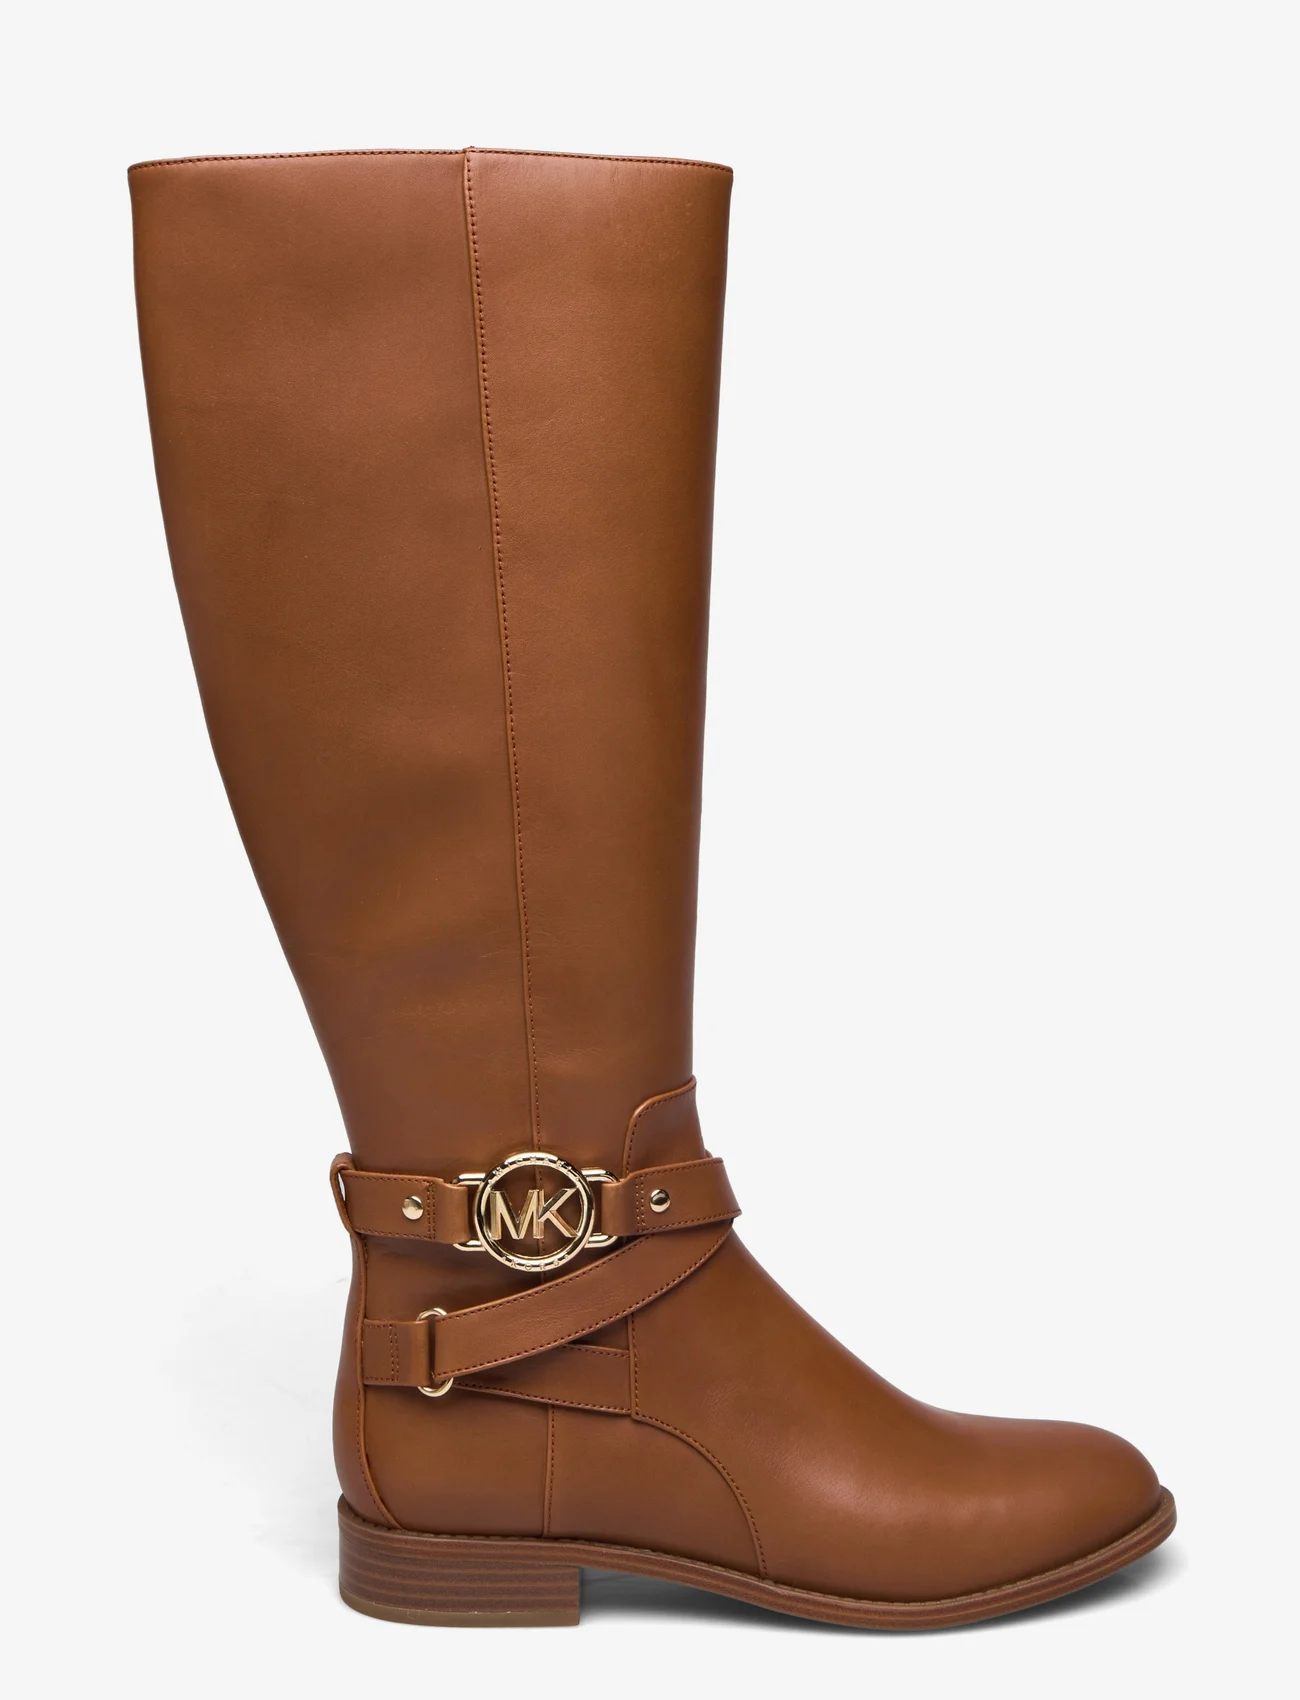 Michael Kors - RORY BOOT - kniehohe stiefel - luggage - 1